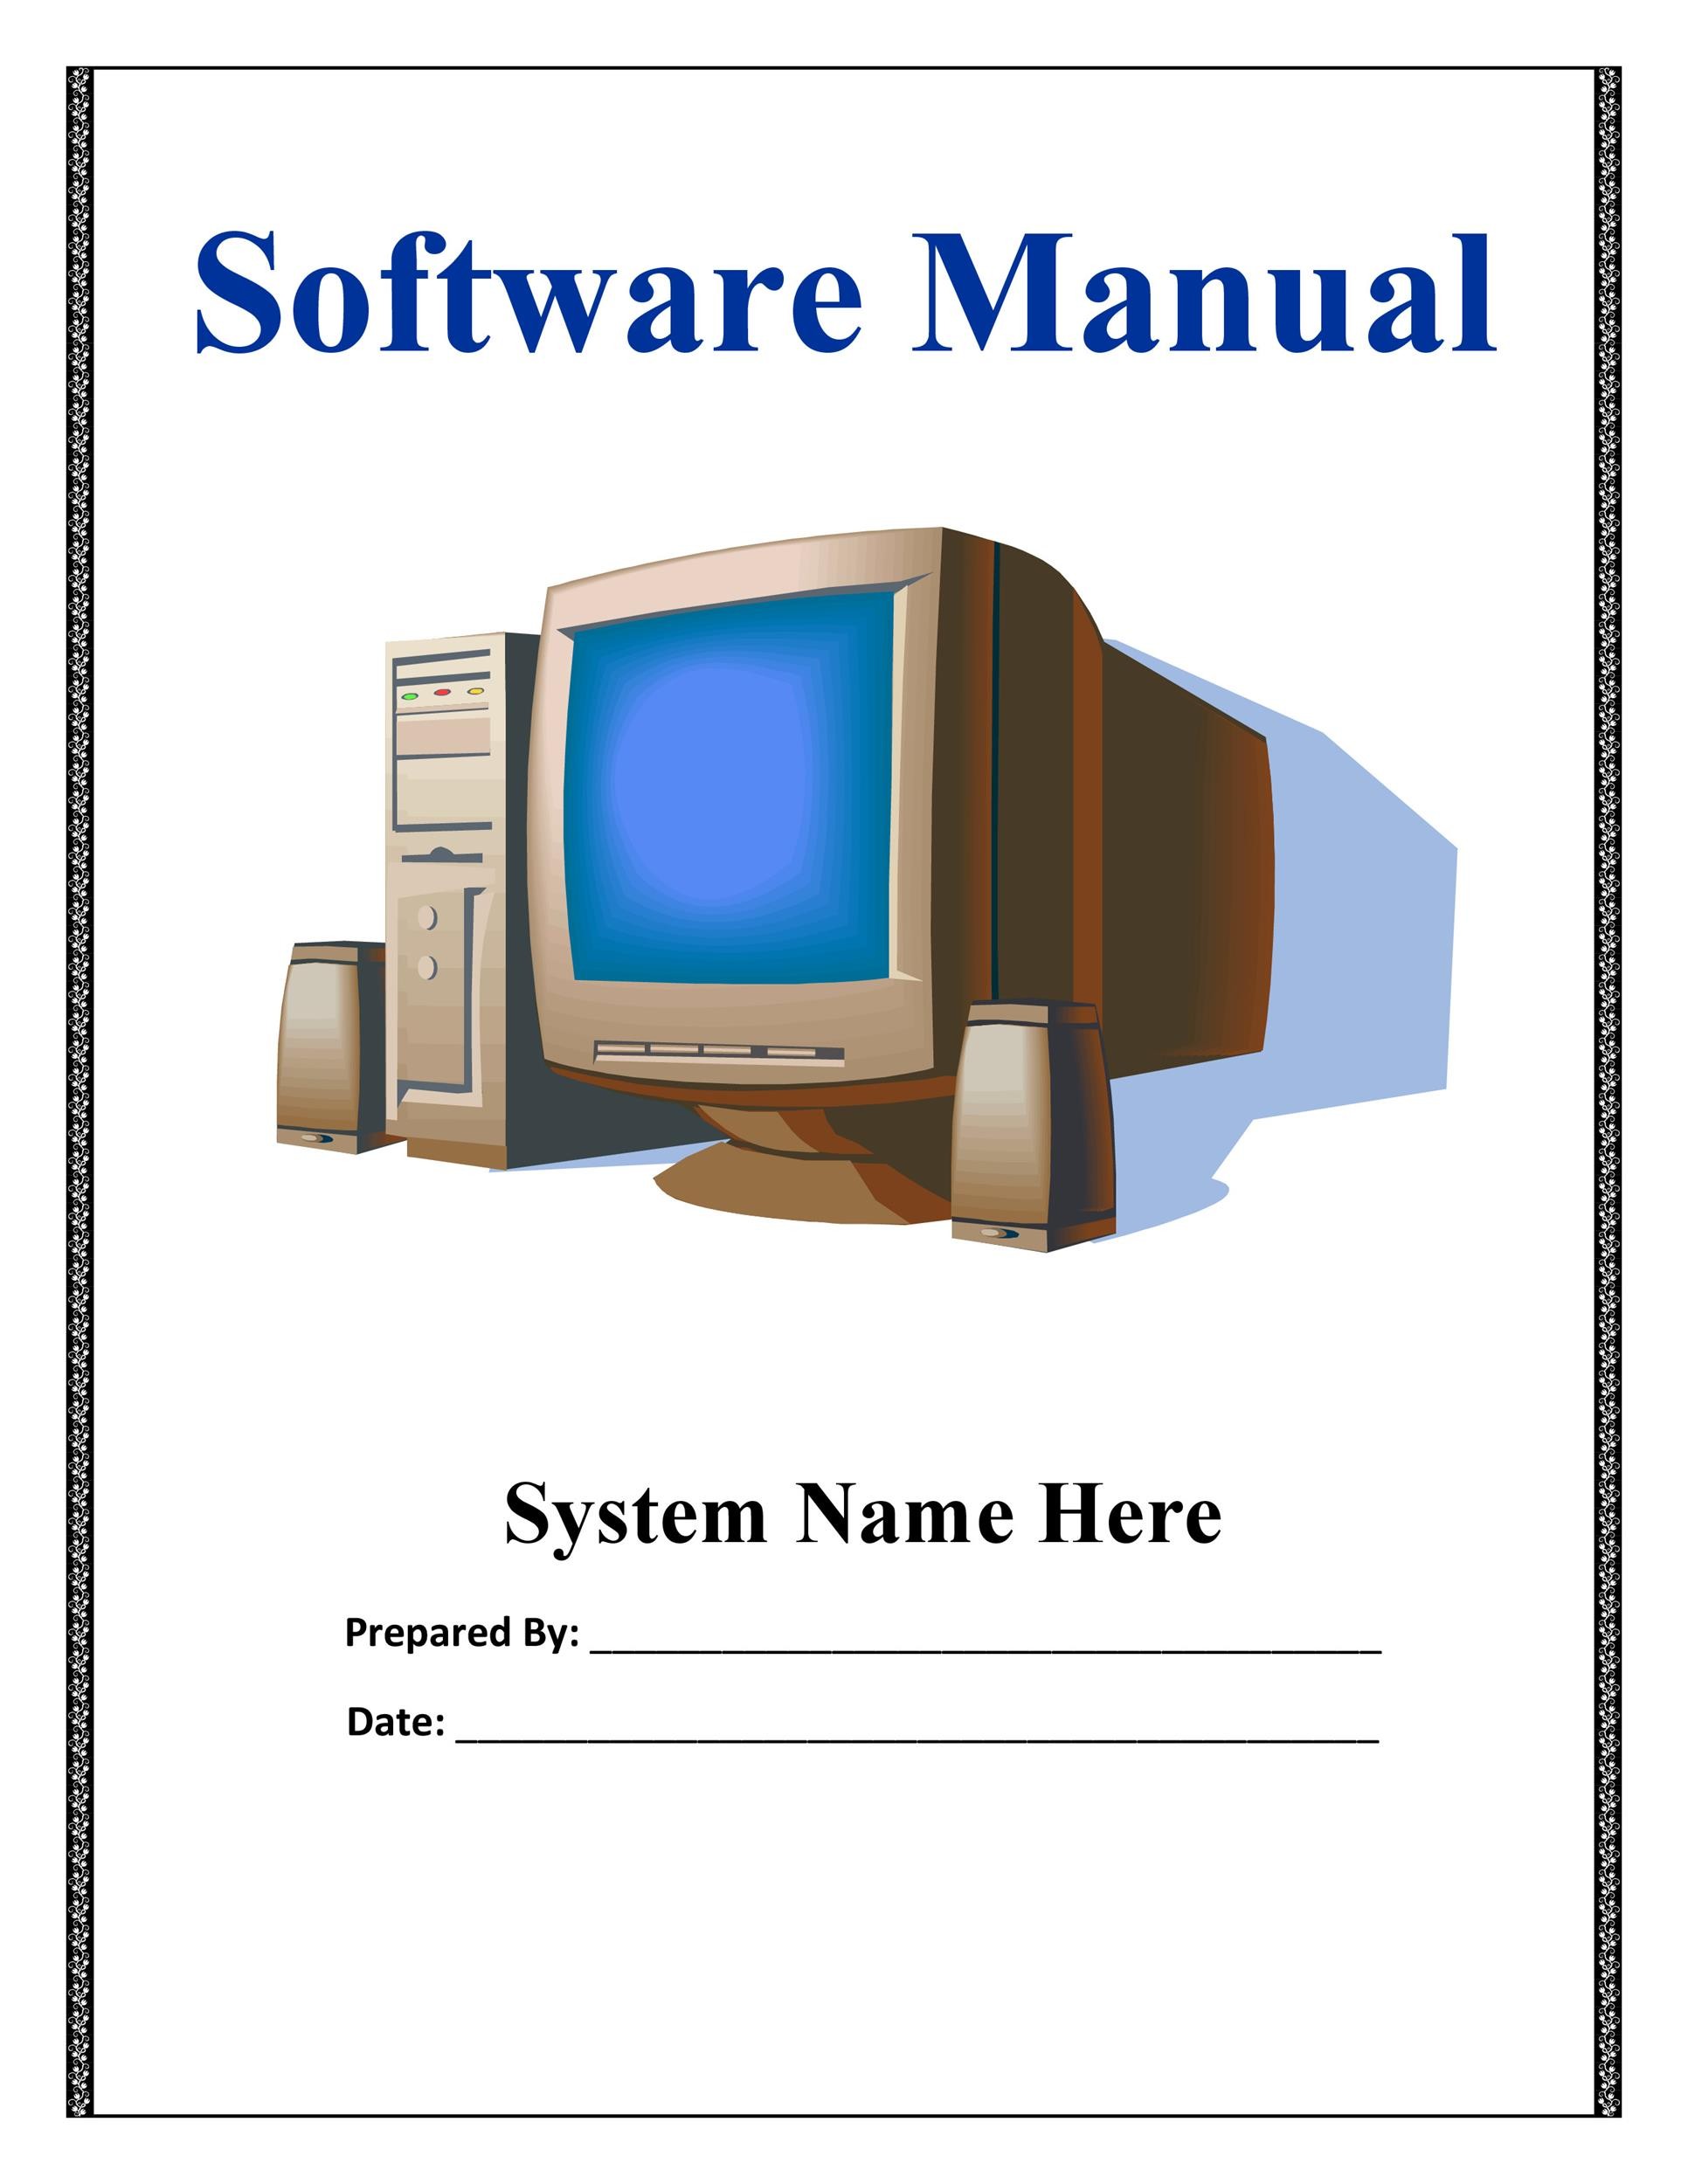 Free instruction manual template 08